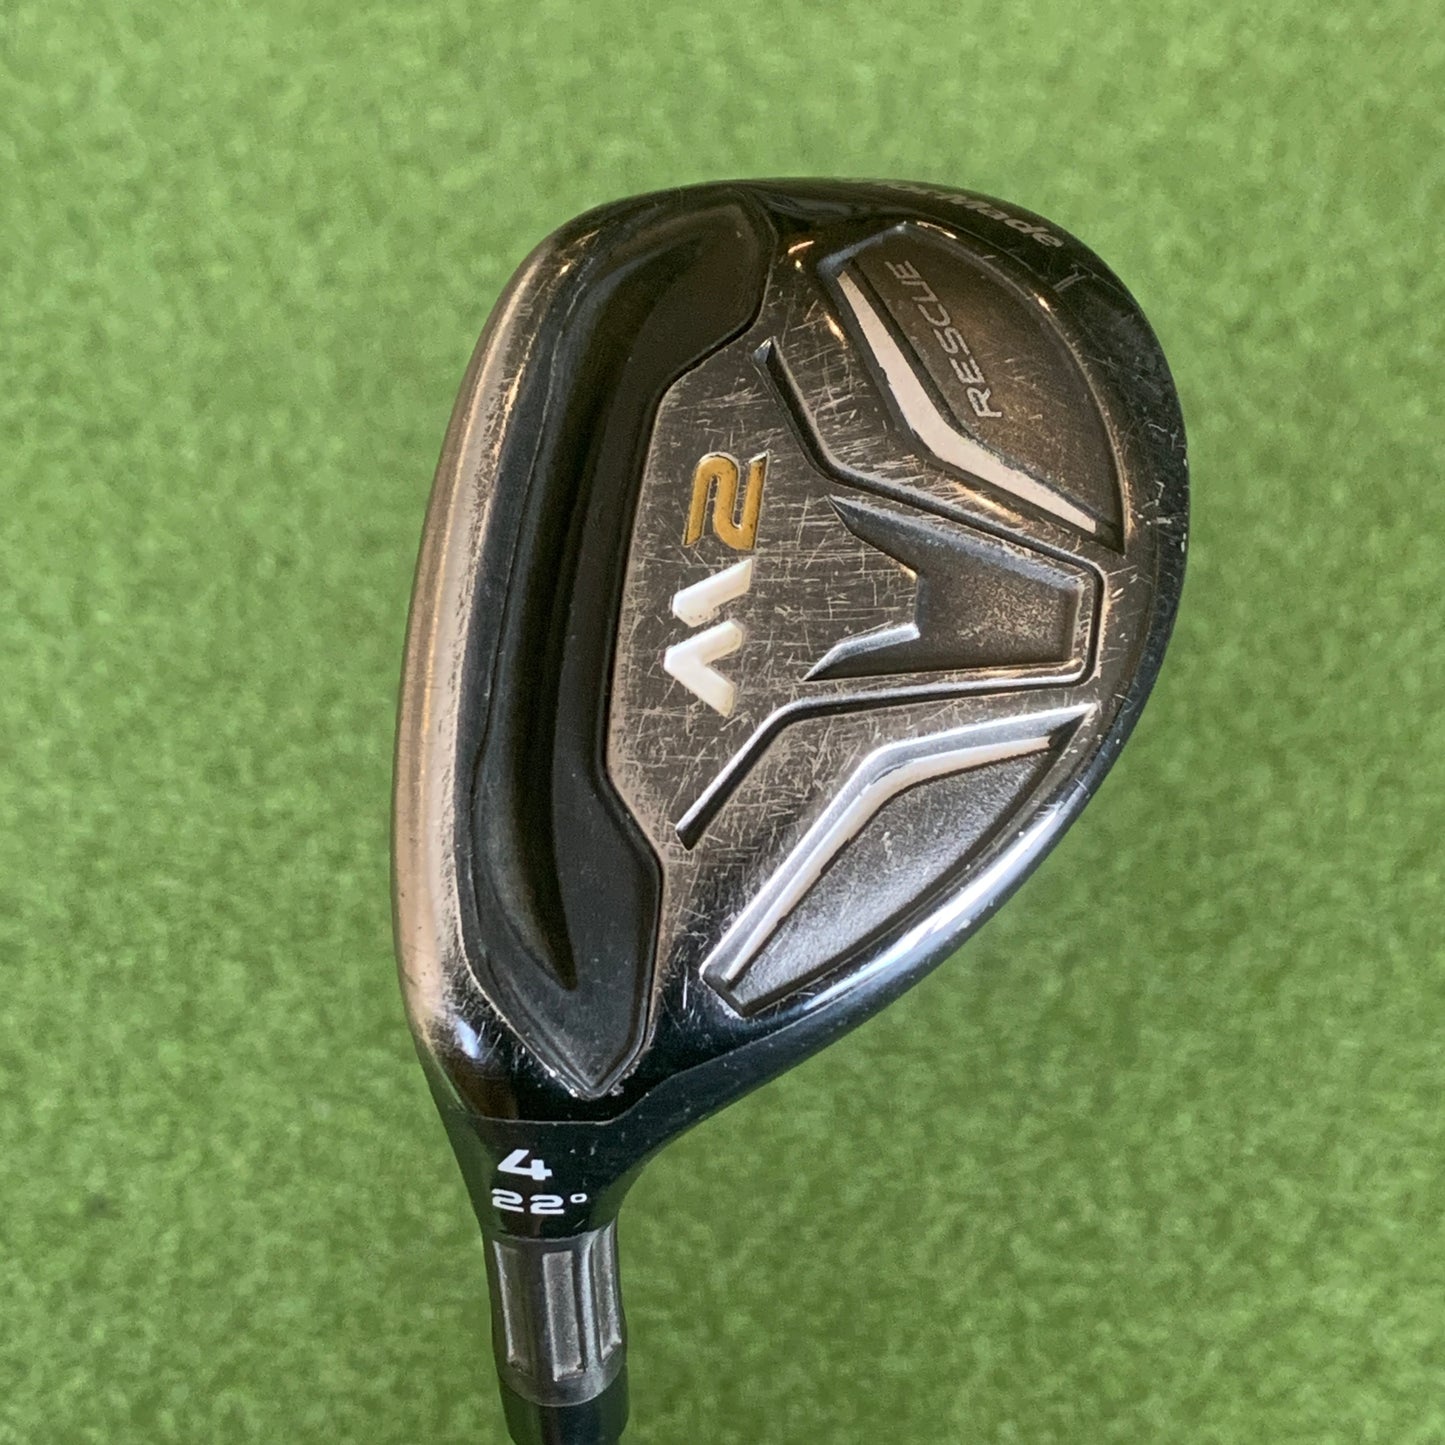 LH Taylormade M2 4 Rescue Hybrid